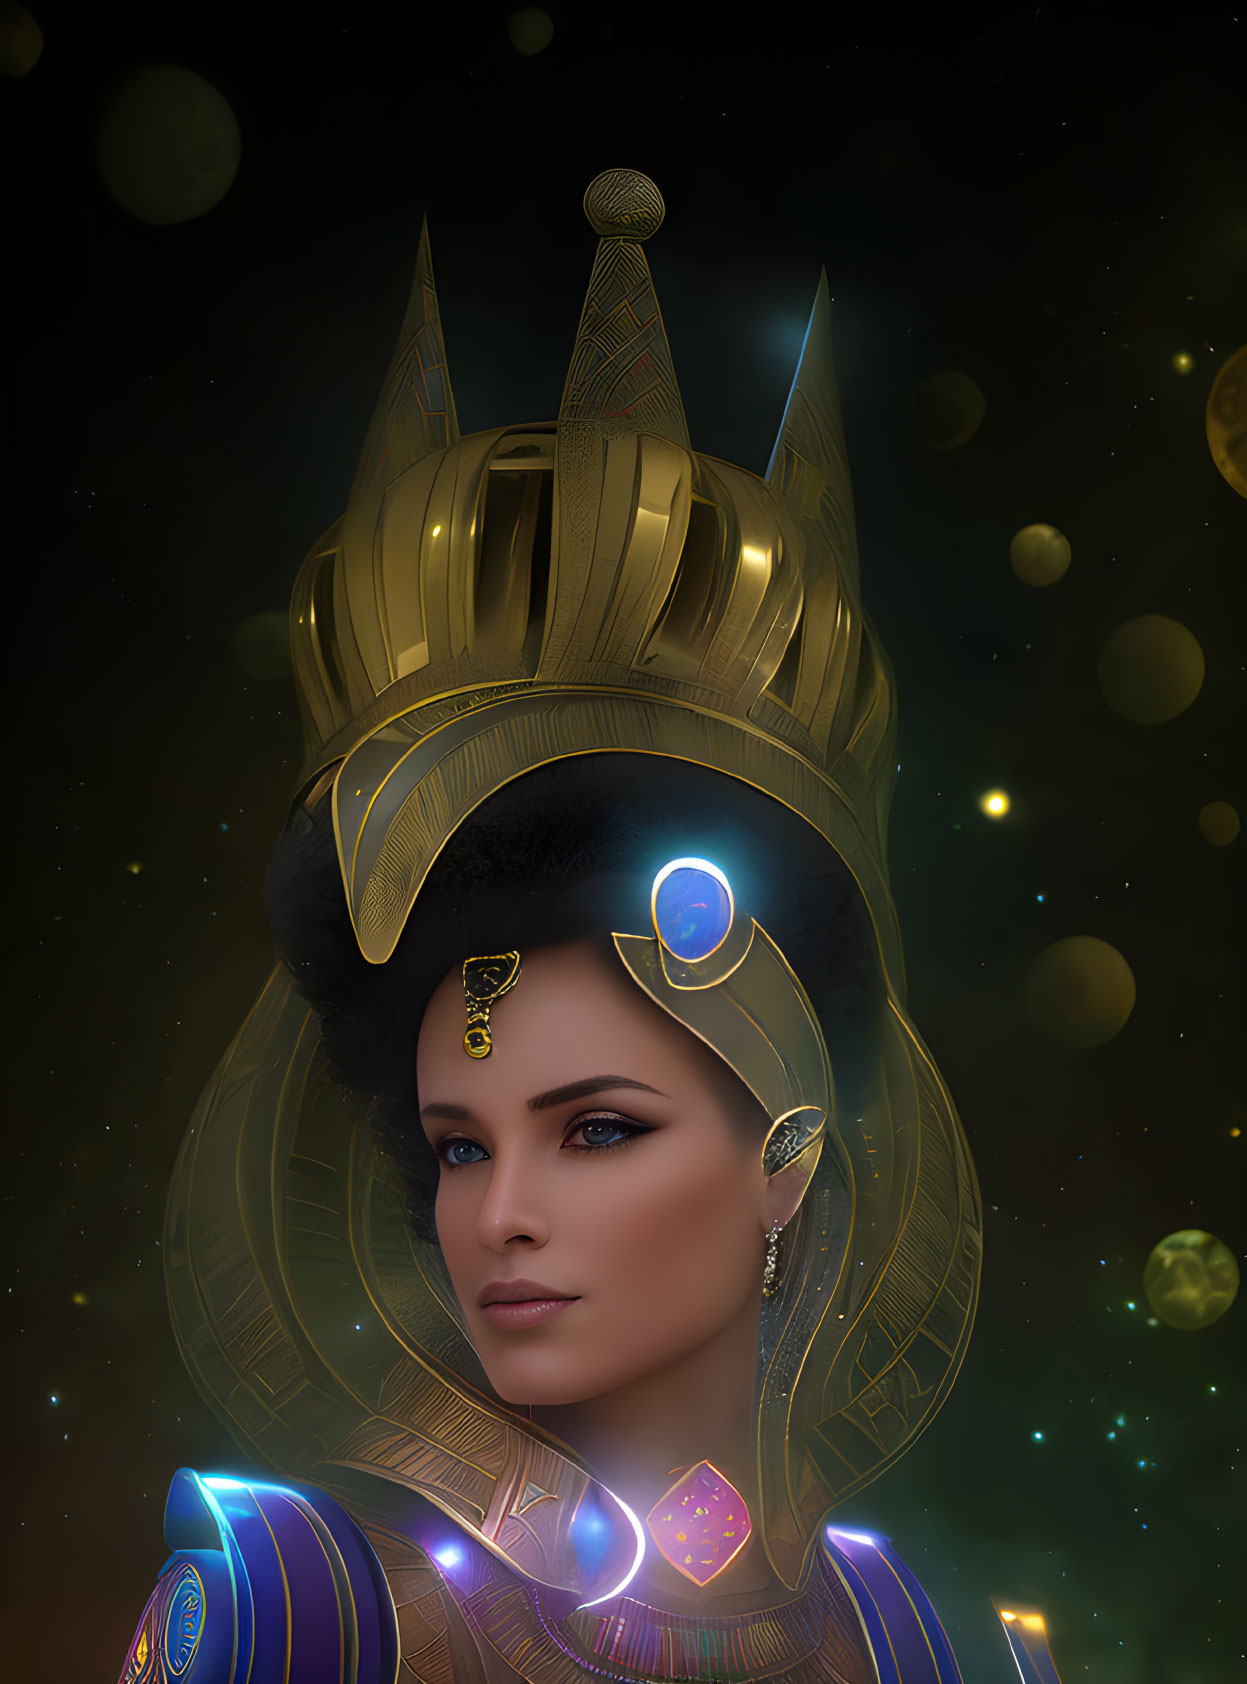 Woman portrait with ornate golden crown and cosmic designs on starry background.